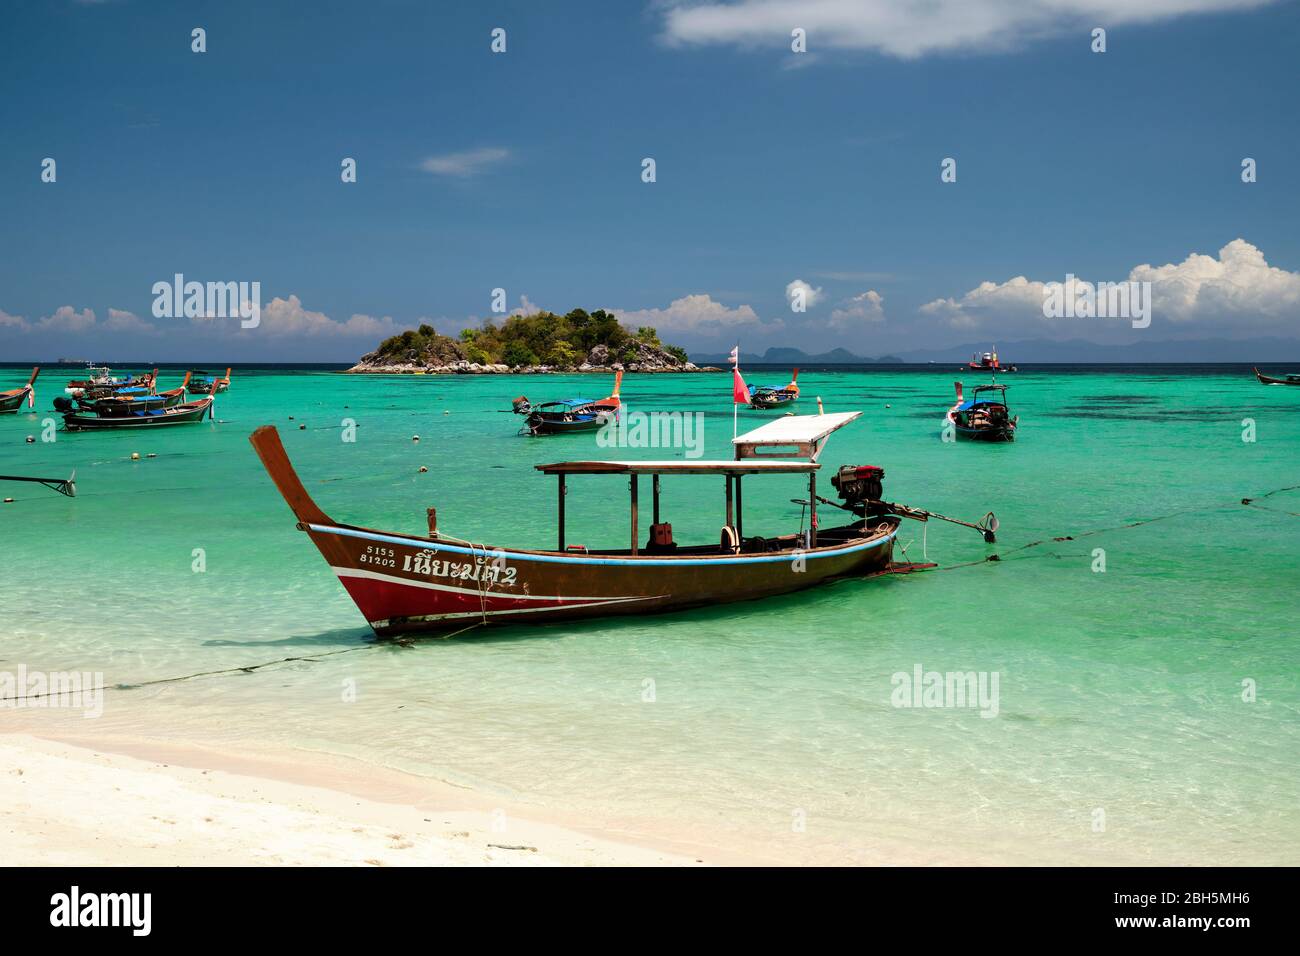 Taxi boat on sunrise beach thailand asia, with clear blue water and blue sky, koh usen island in the background. Stock Photo